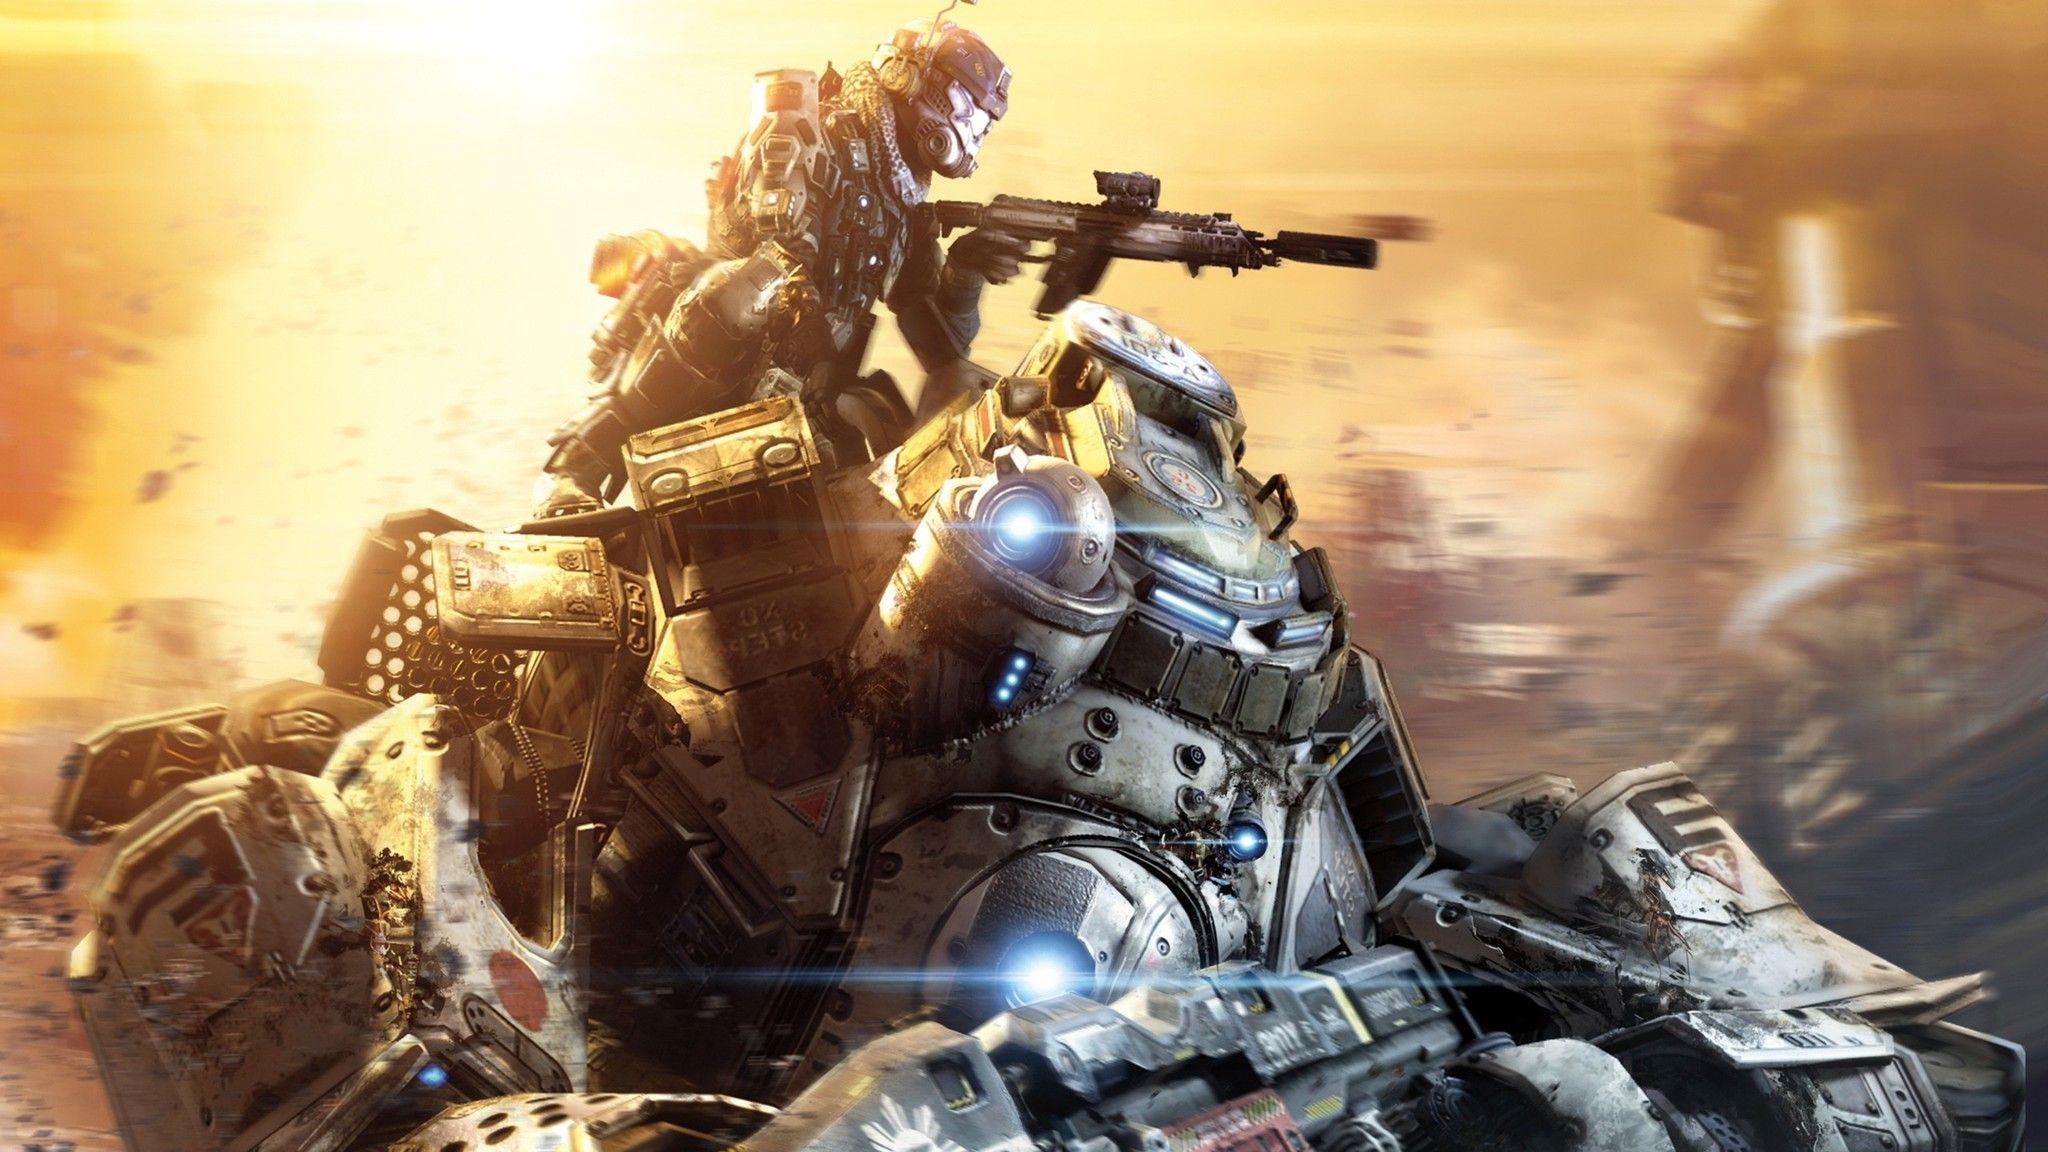 Download Titanfall Game HD Wallpaper In 2048x1152 Screen Resolution